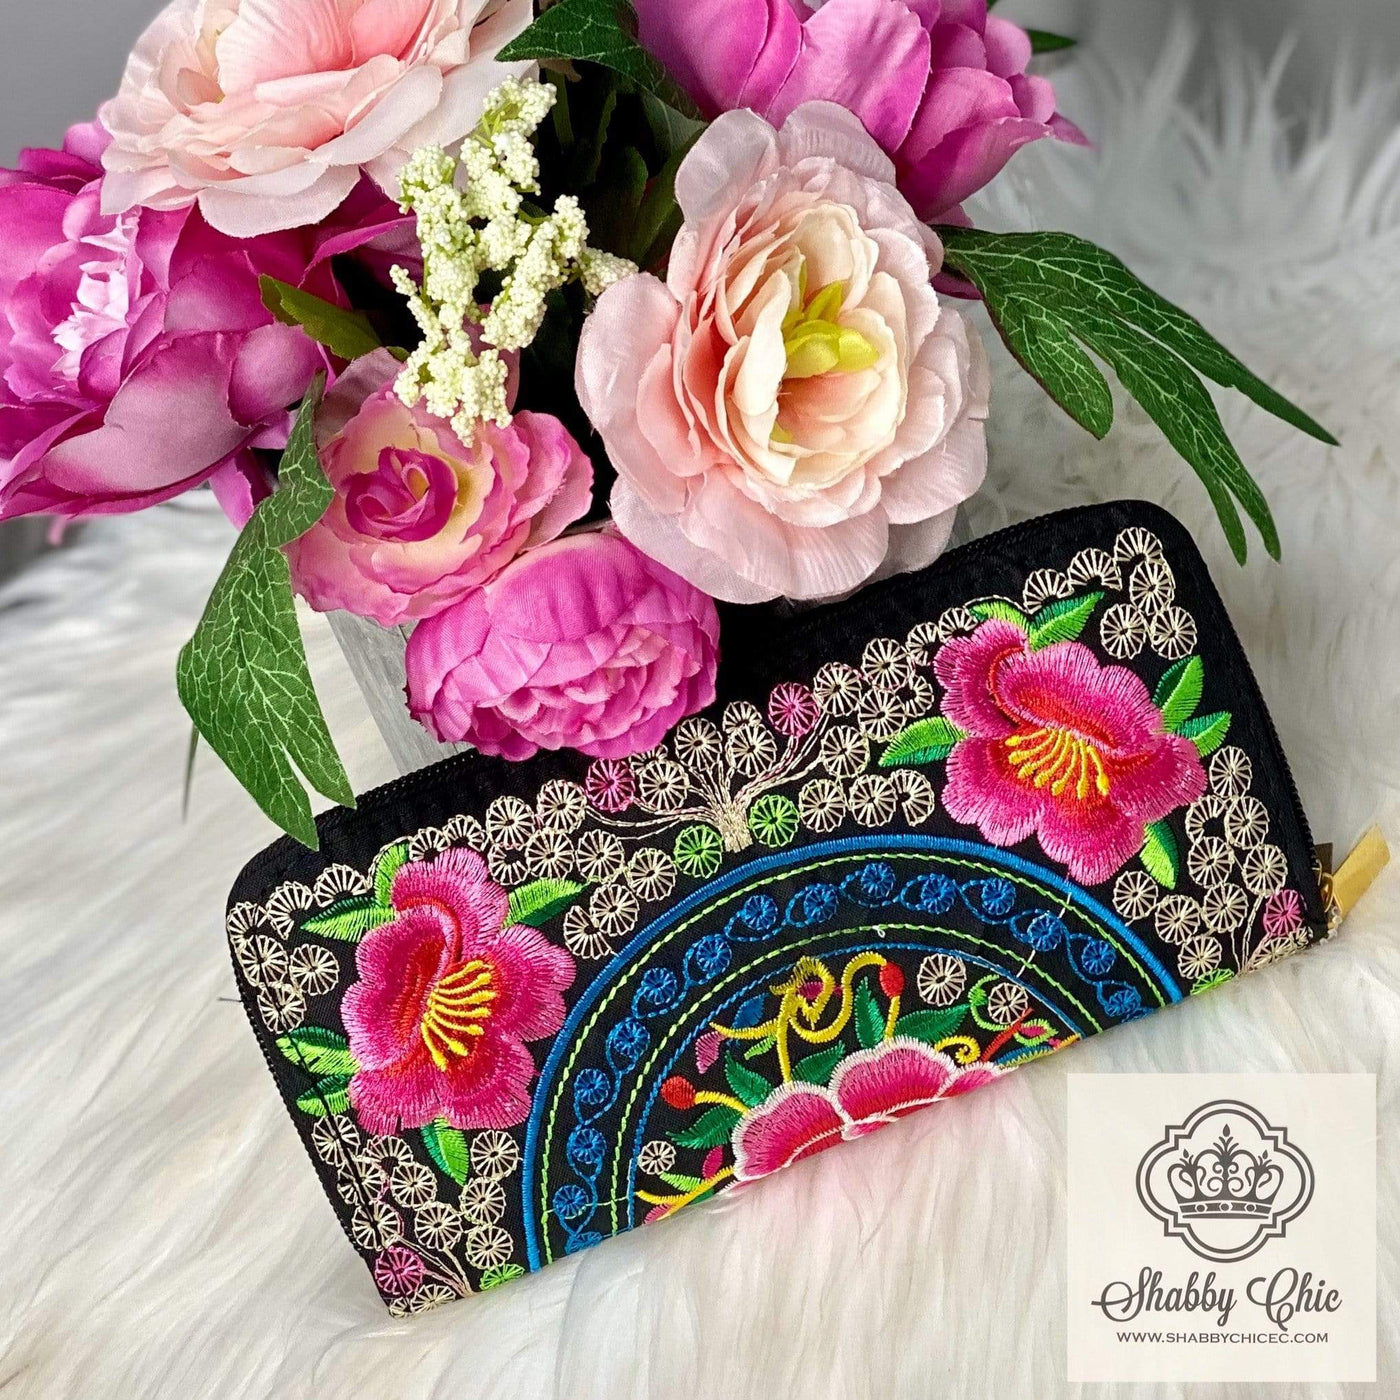 Floral Embroidery Zip Wallet Shabby Chic Boutique and Tanning Salon